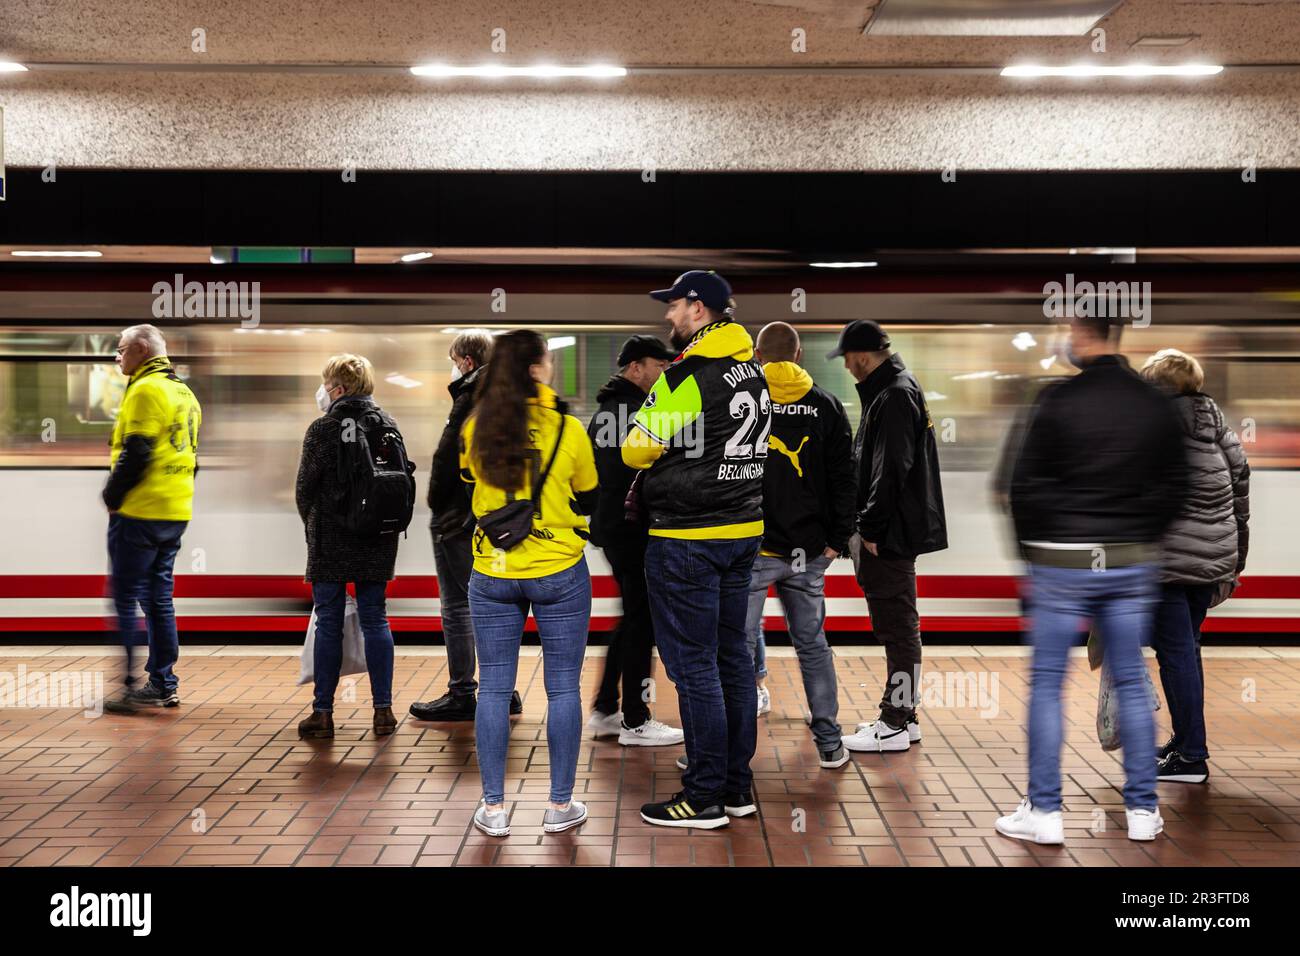 Picture of the group of BVB Borussia dortmun supporters waiting for a train at a metro tram station of dortmunder stadtbahn in the city center of the Stock Photo